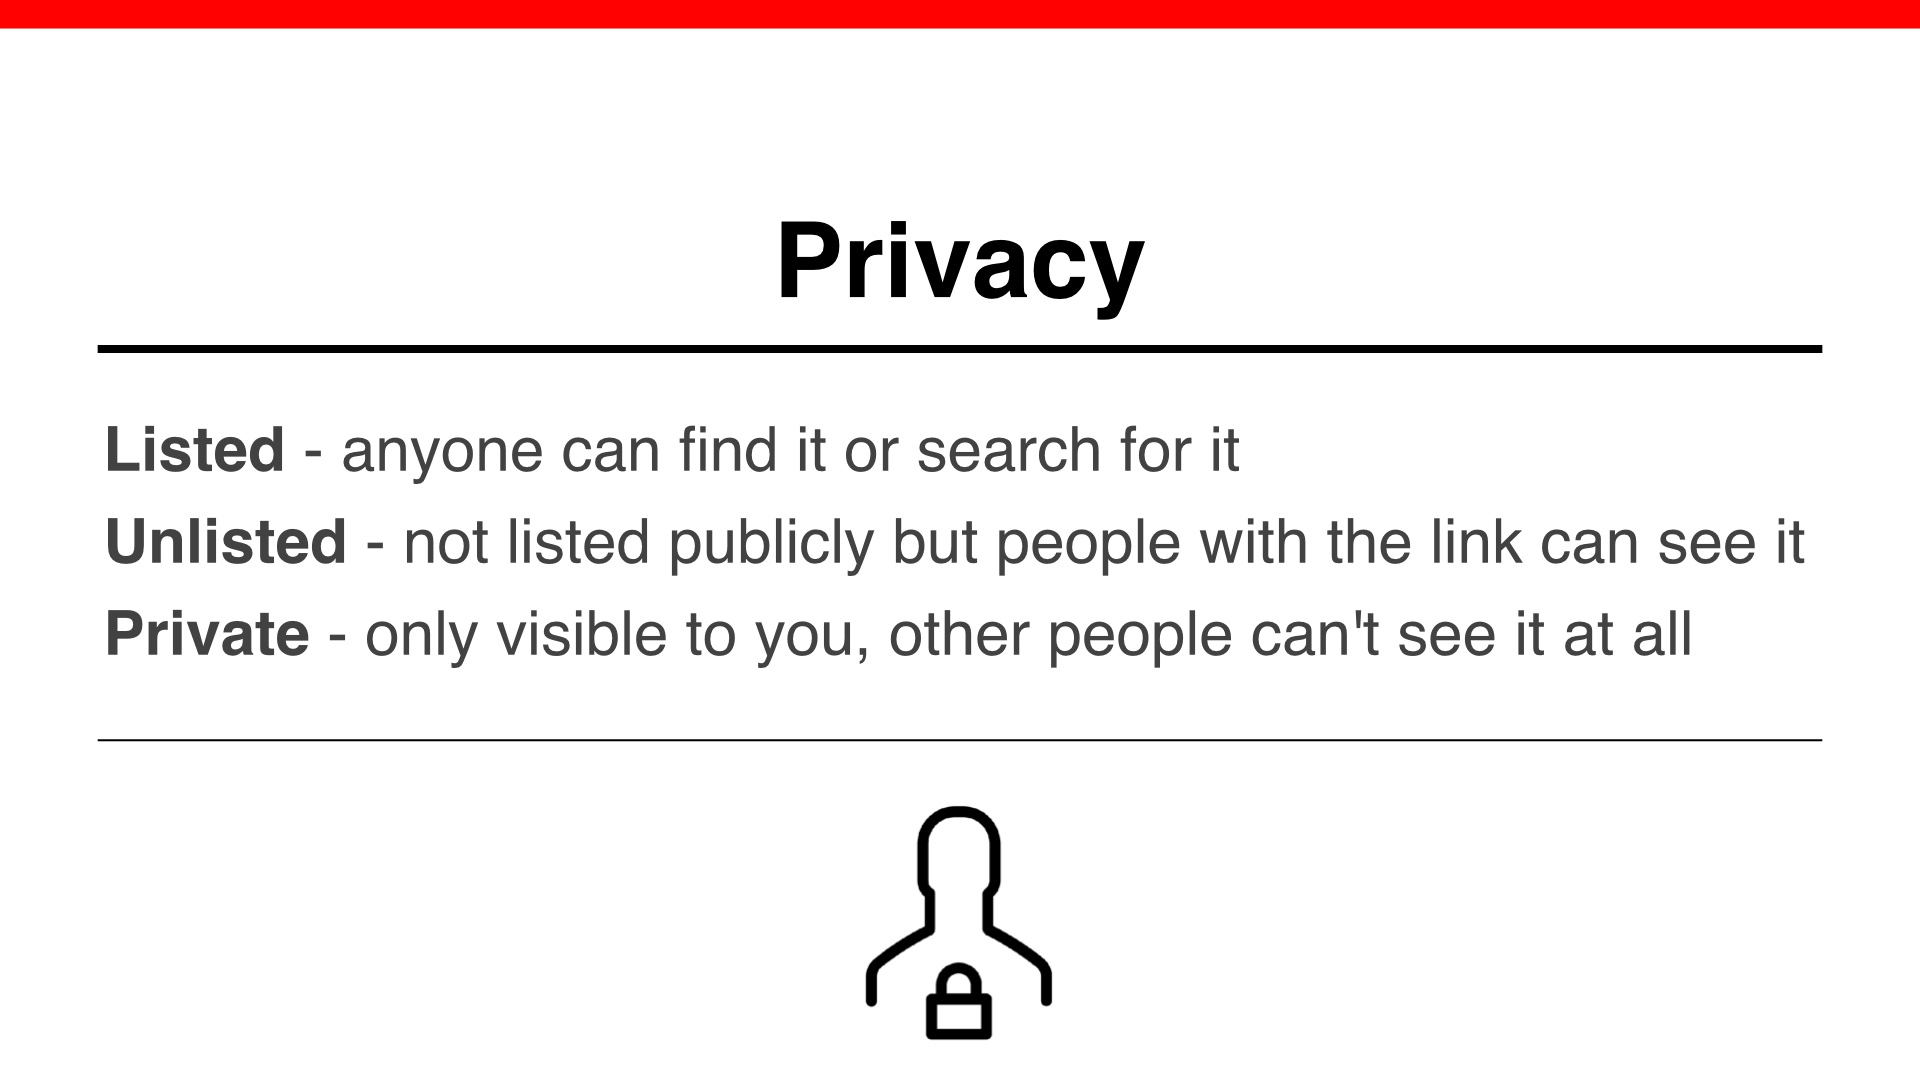 Privacy: Listed - anyone can find it or search for it, Unlisted - not listed publicly but people with the link can see it, Private - only visible to you, other people can't see it at all